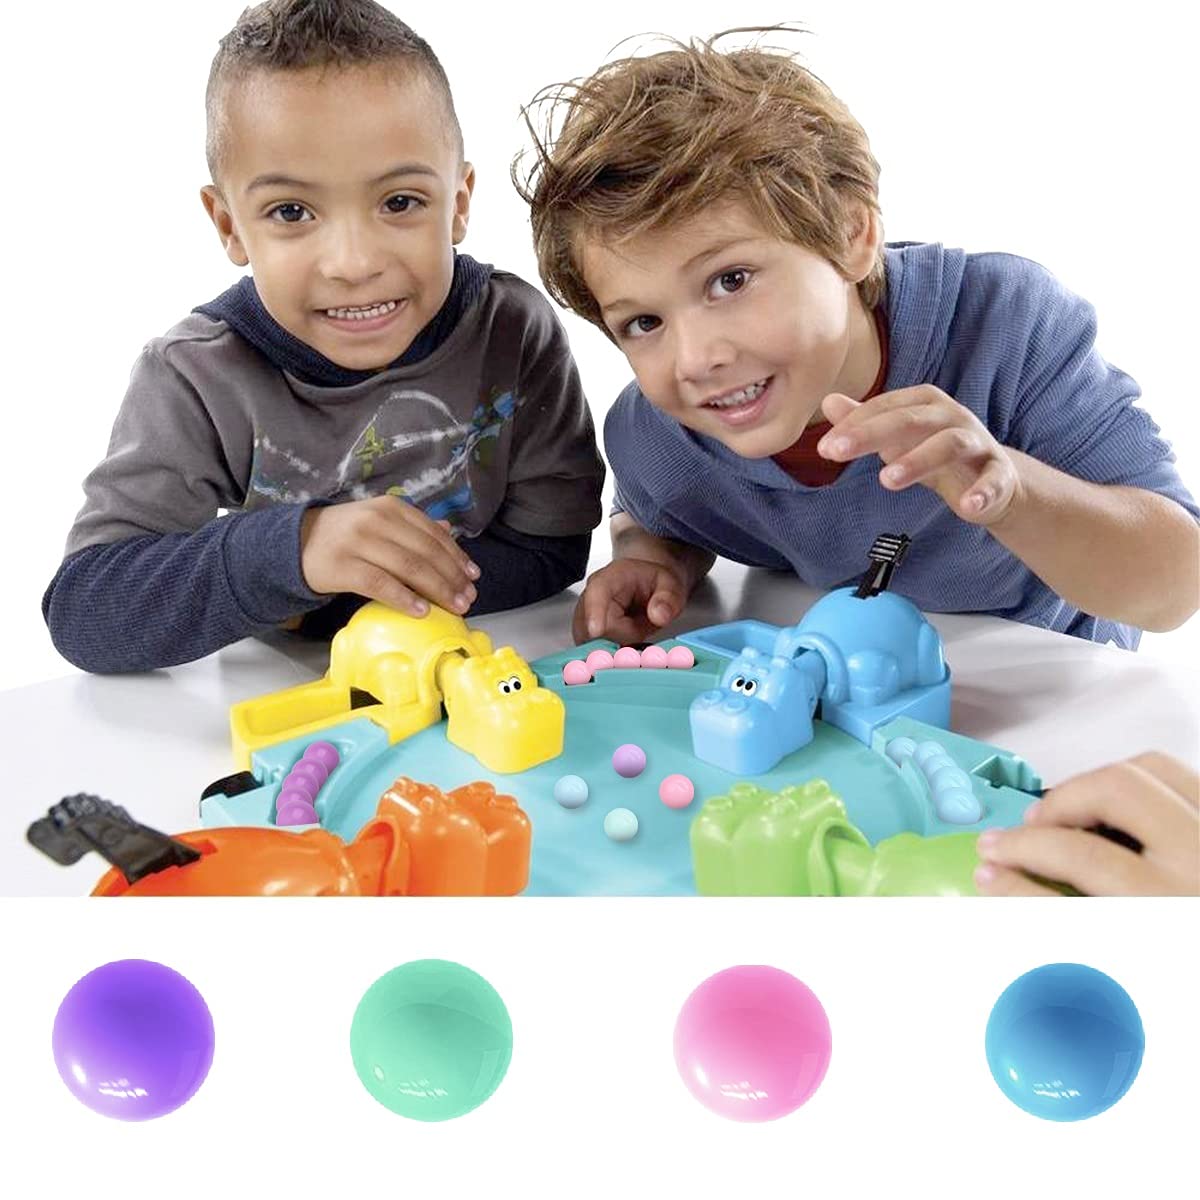 Hotusi 40Pcs Game Replacement Marbles Balls Compatible with Hungry Hungry Hippos